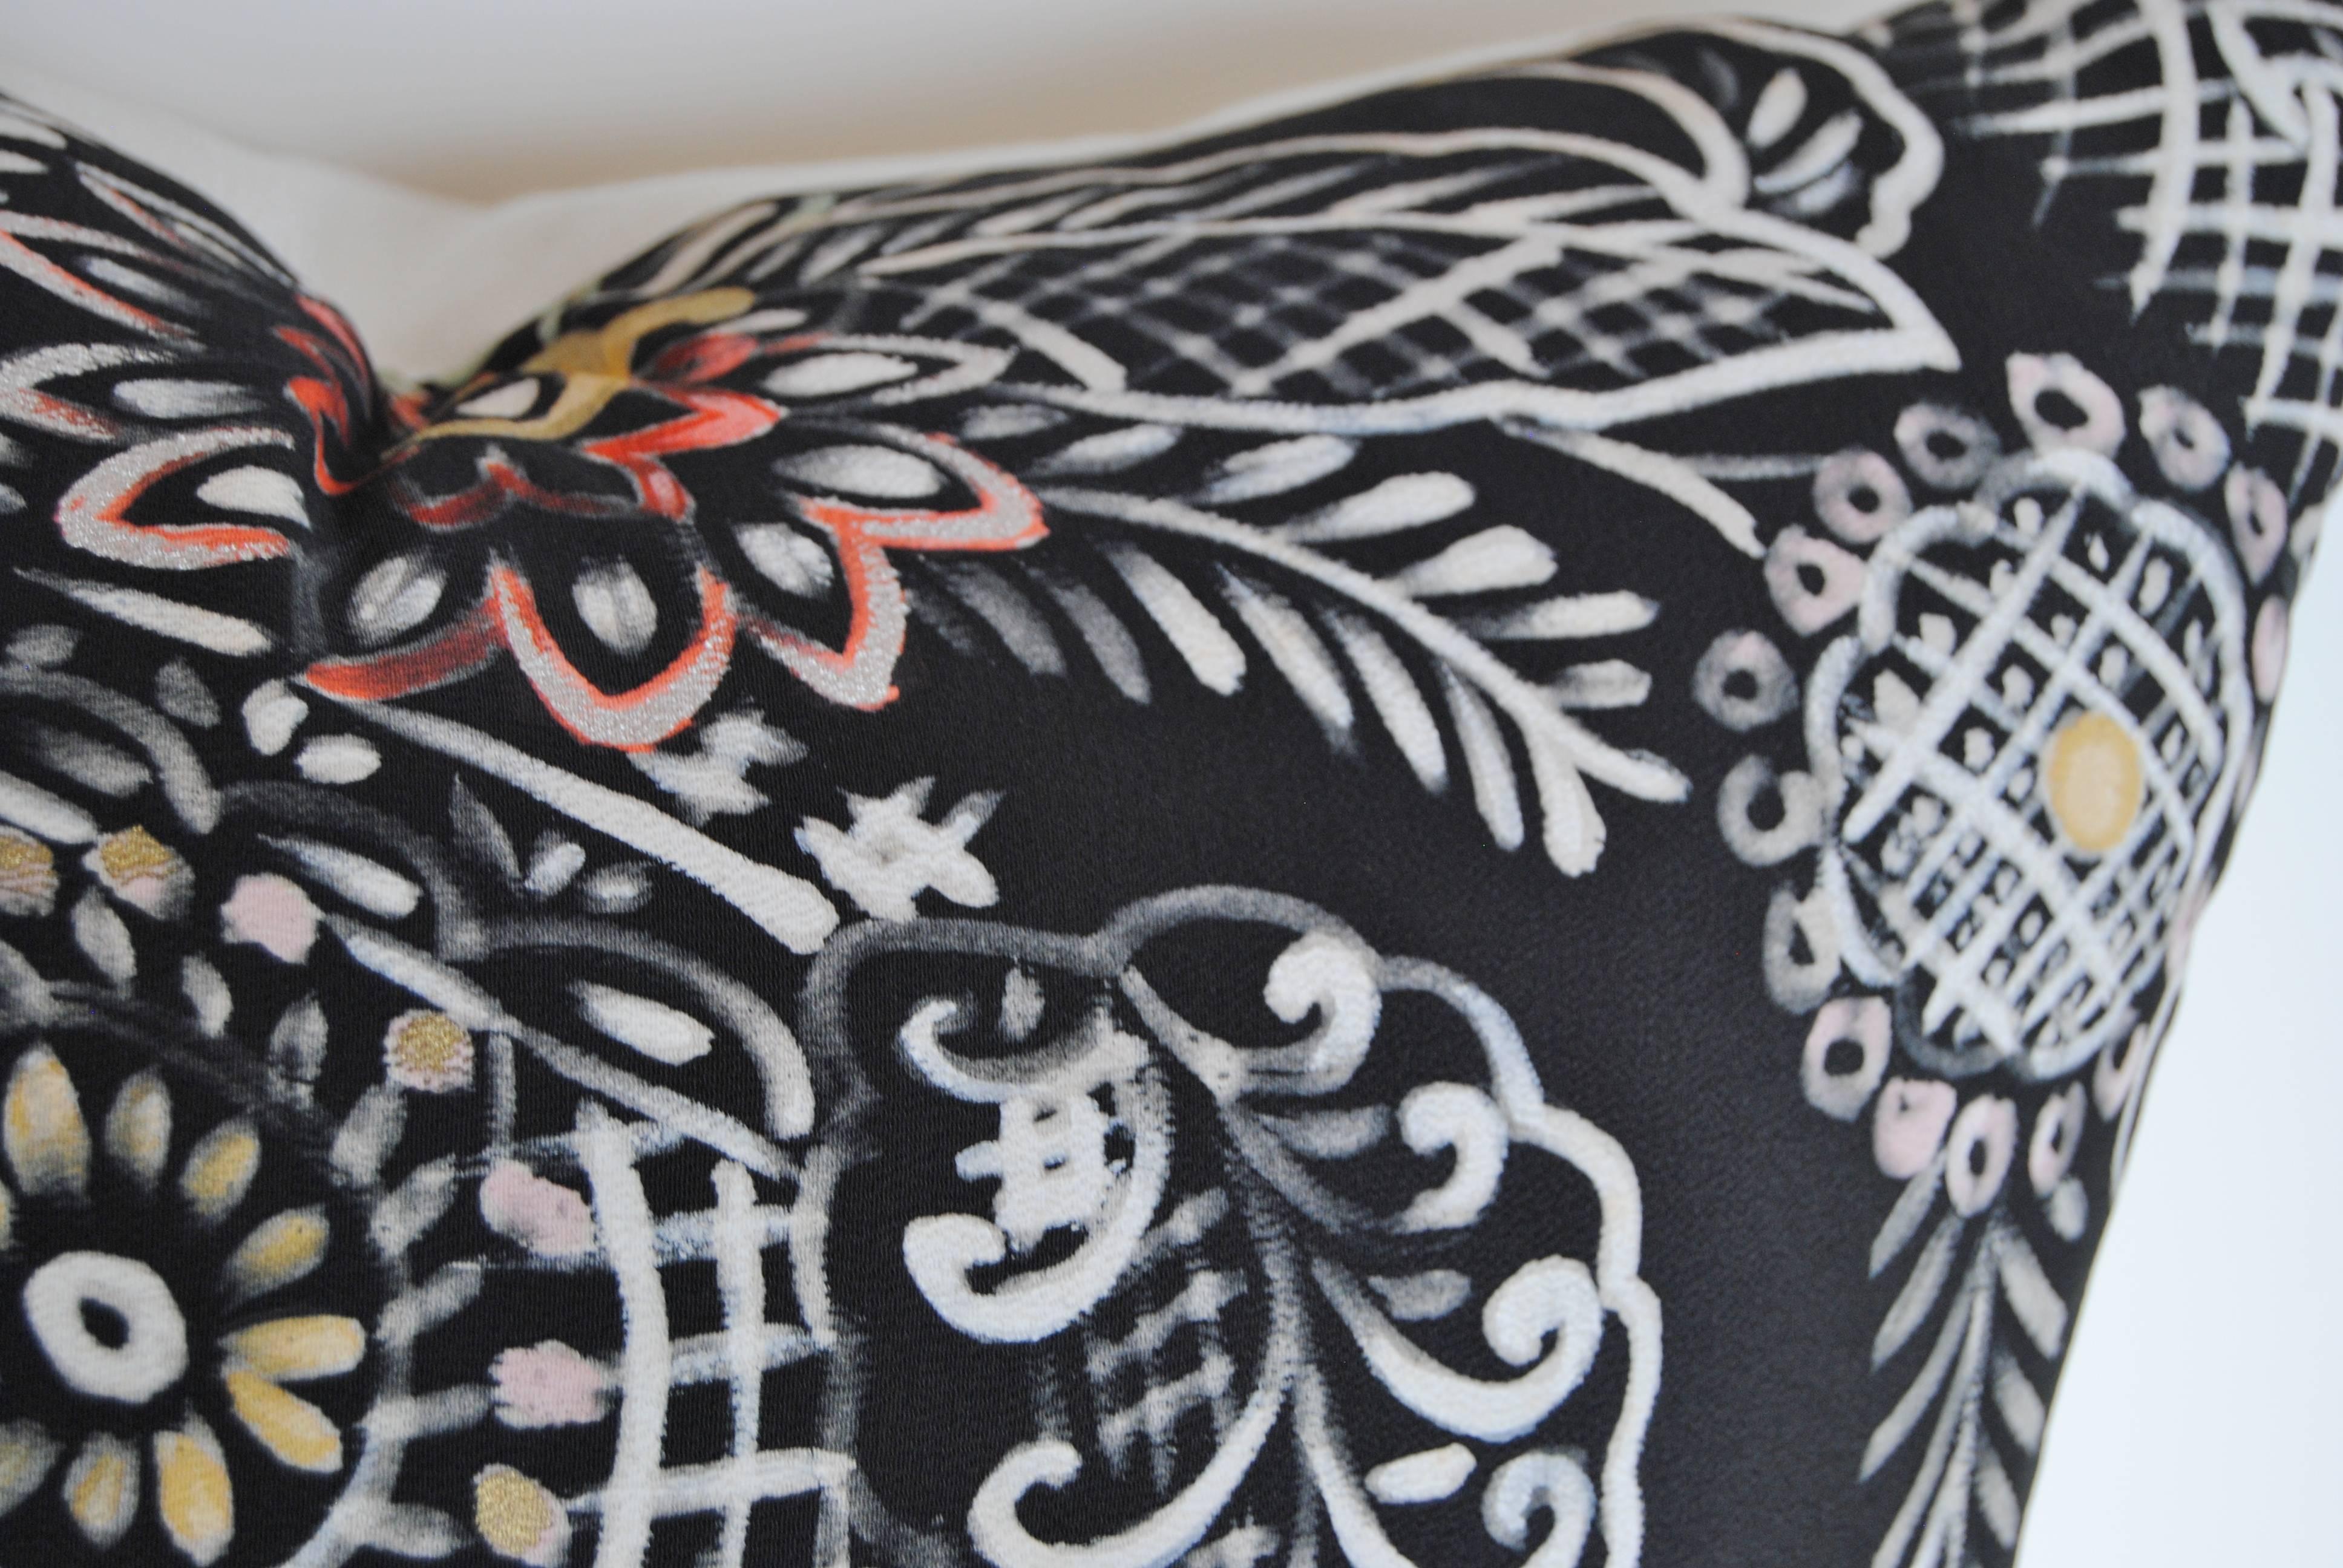 Custom pillow cut from a vintage hand-painted black silk Japanese kimono. The black and white textile design is accented with touches of metallic color. Pillow is backed in white linen, filled with an insert of 50/50 down and feathers and hand-sewn